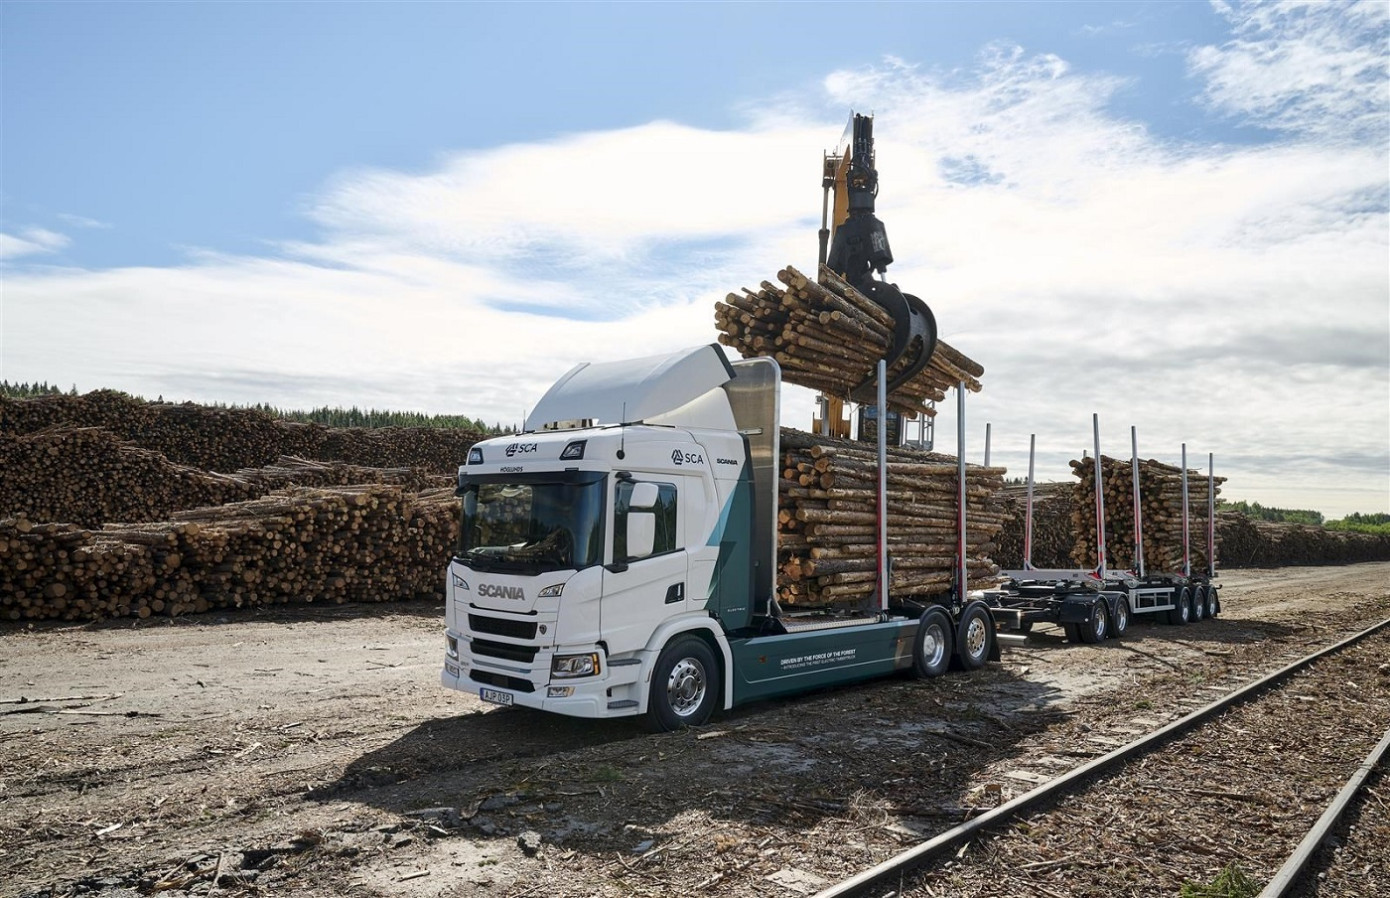 SCA and Scania developed world"s first electric timber truck